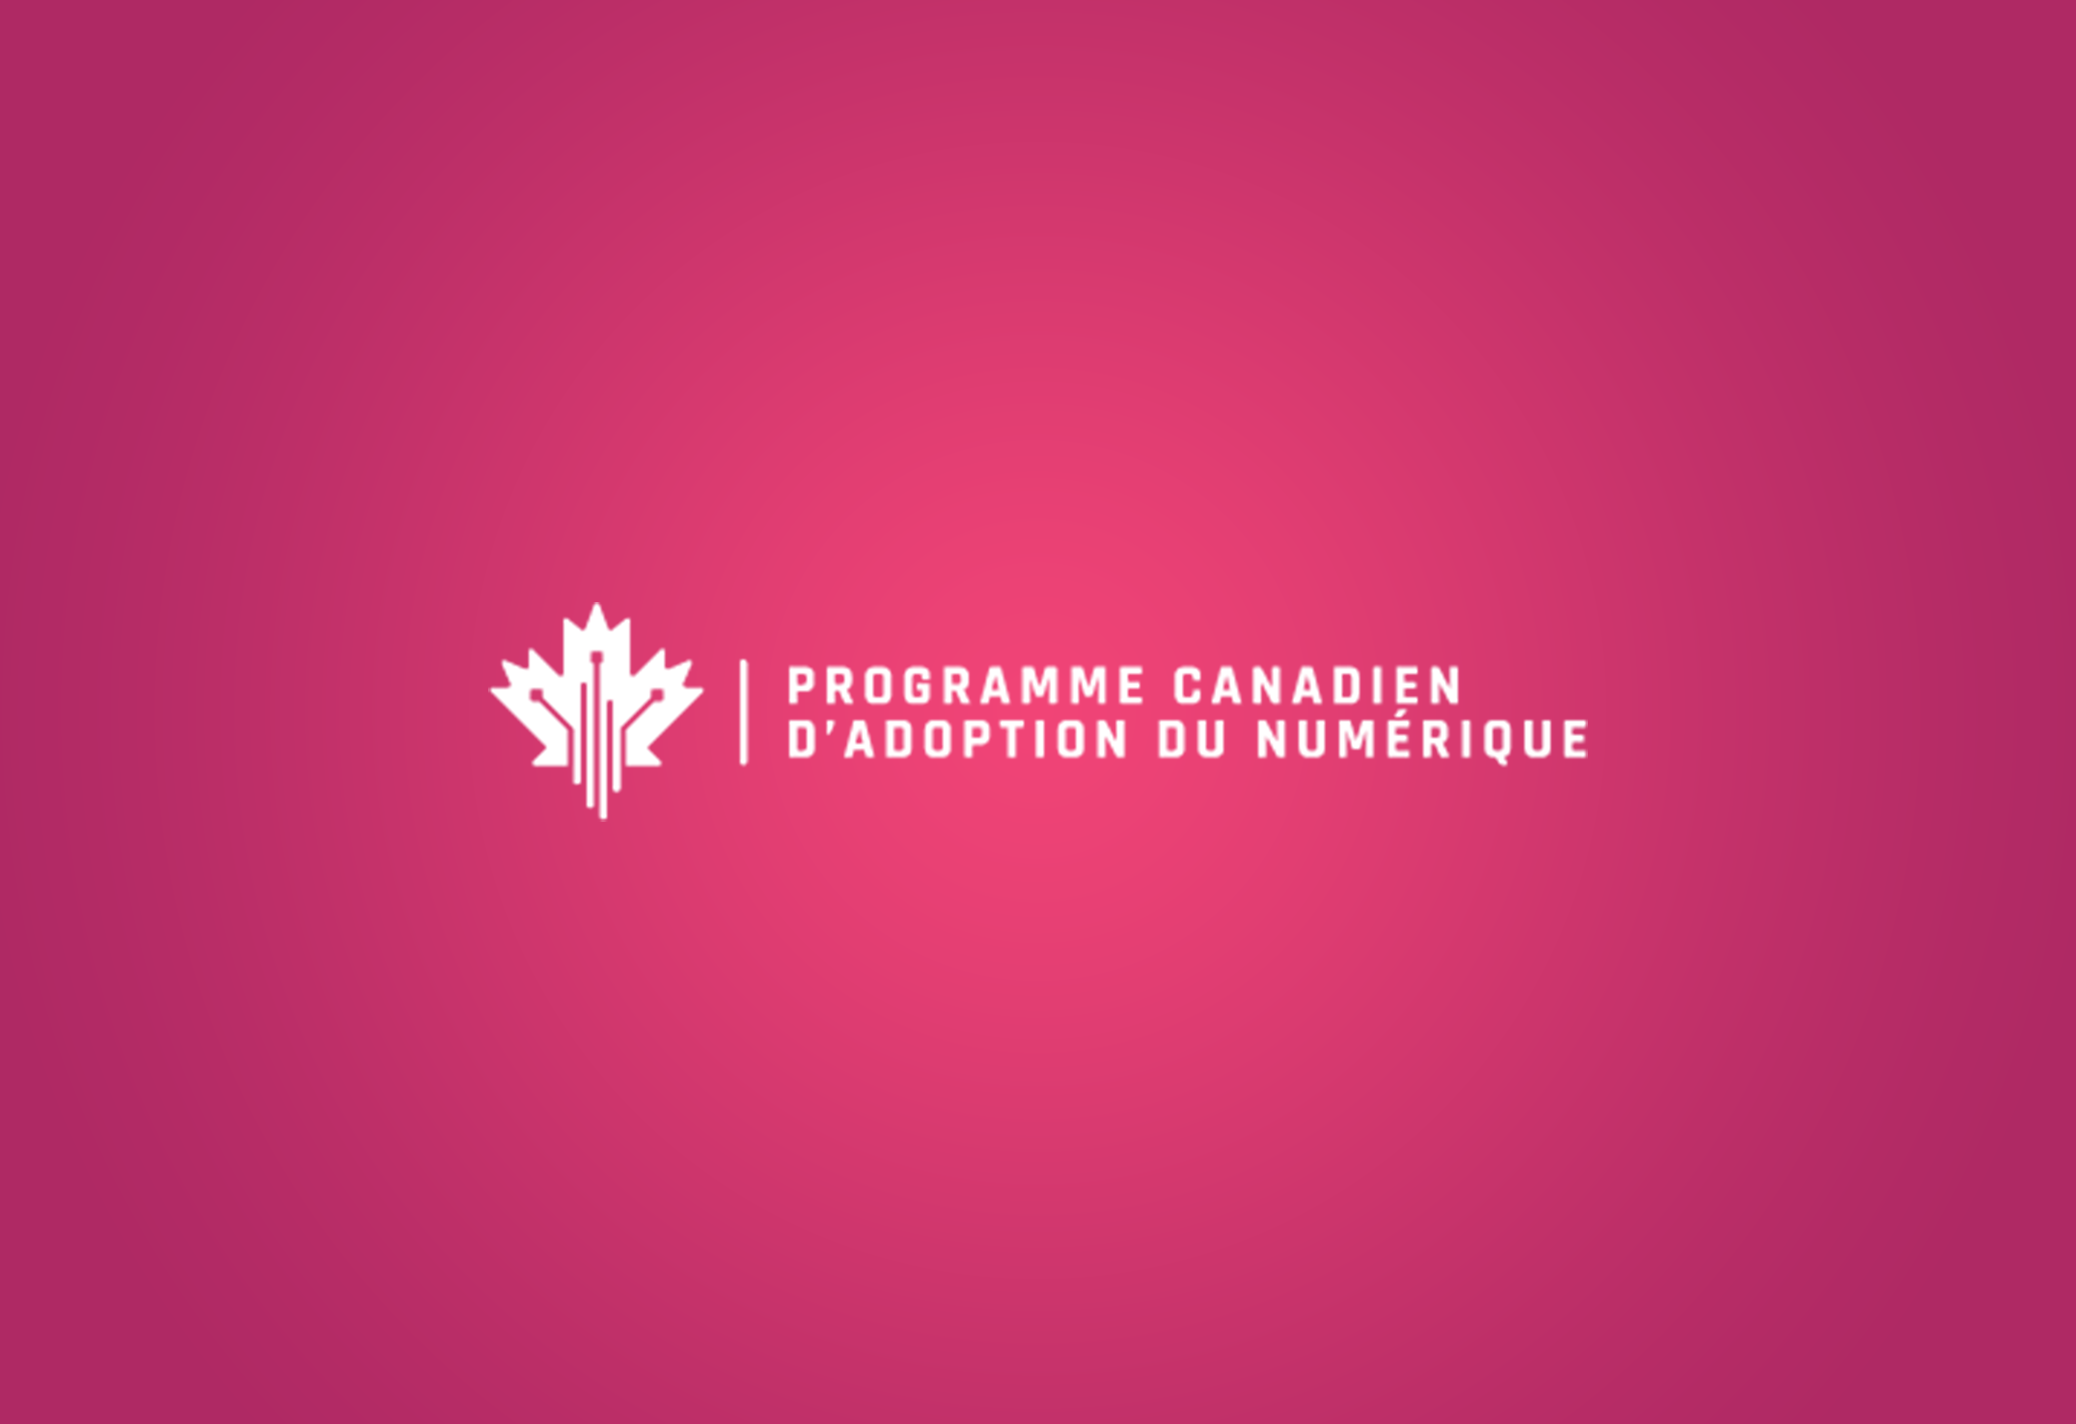 PCAN Launches Grant for the Development of a Digital Transformation Plan